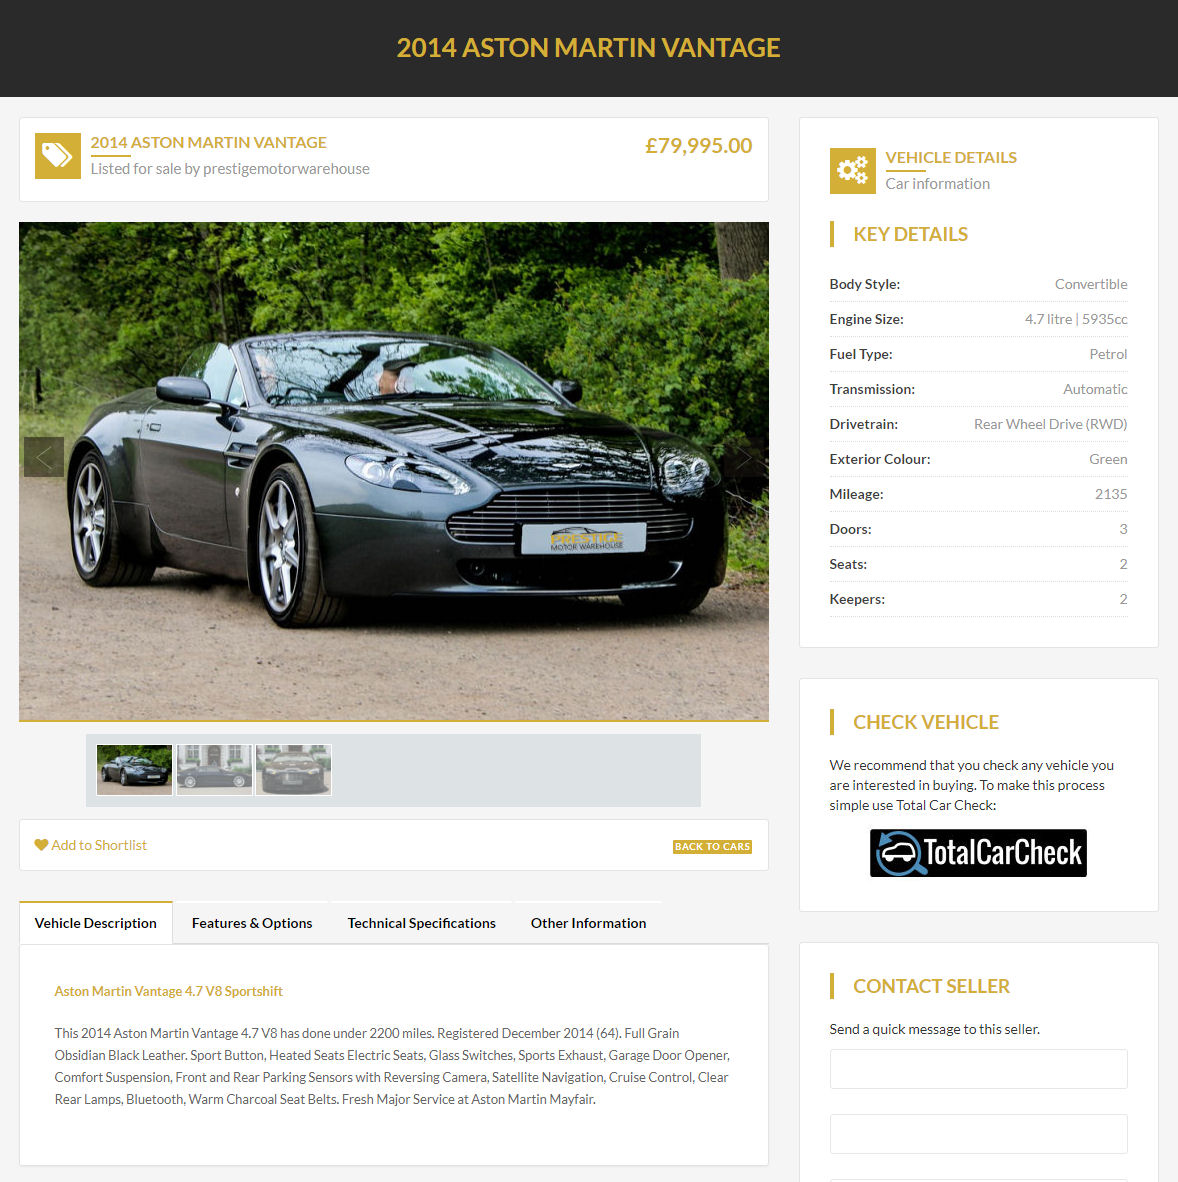 Sell your Luxury Car - Create a Listing